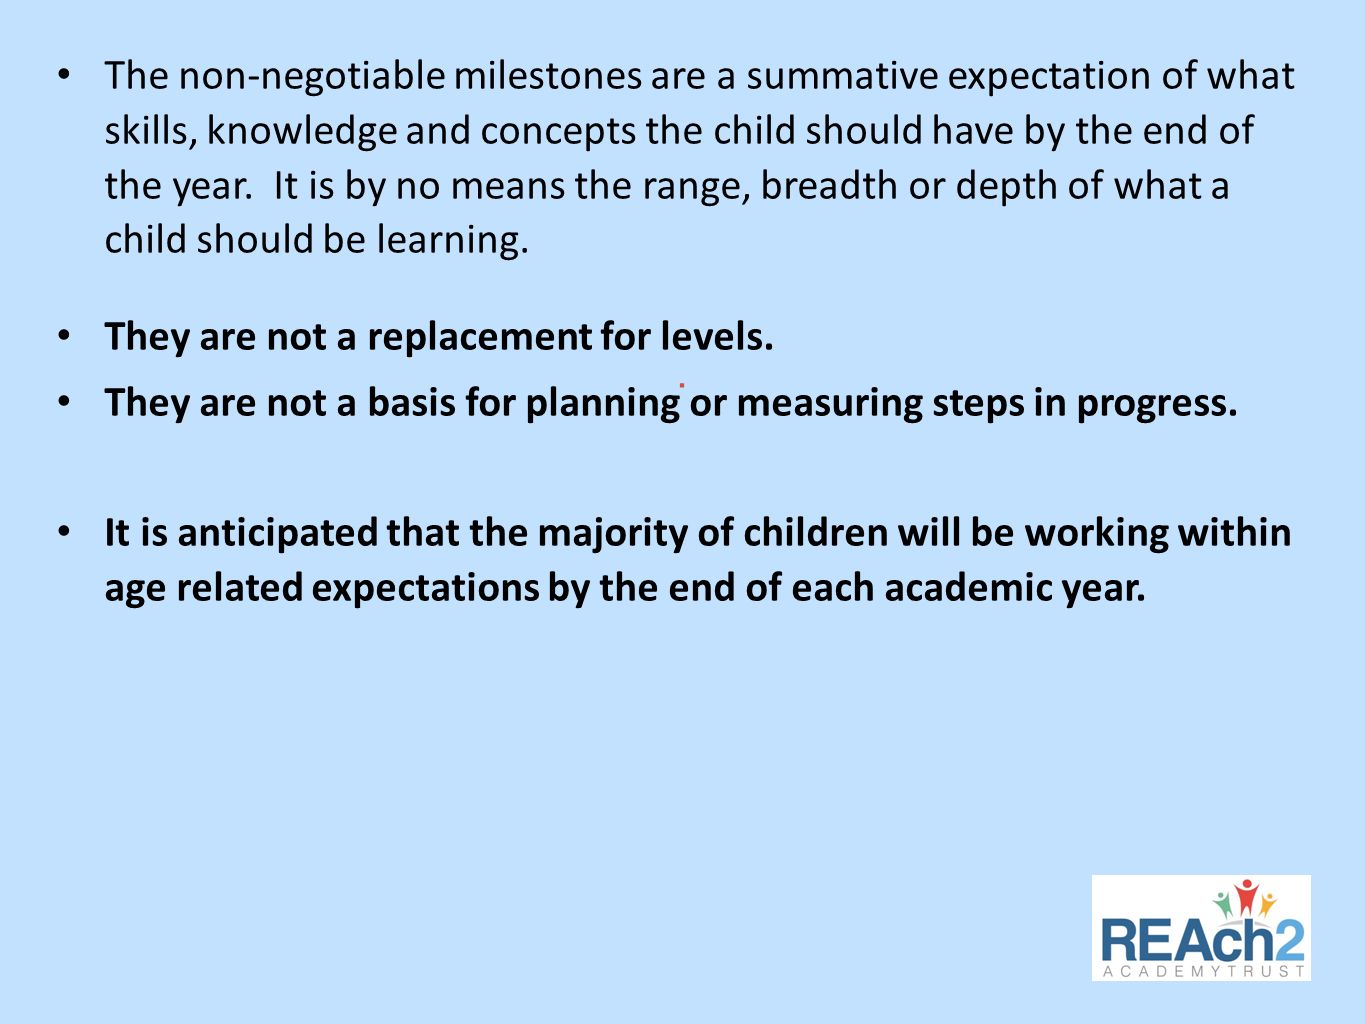 The non-negotiable milestones are a summative expectation of what skills, knowledge and concepts the child should have by the end of the year.